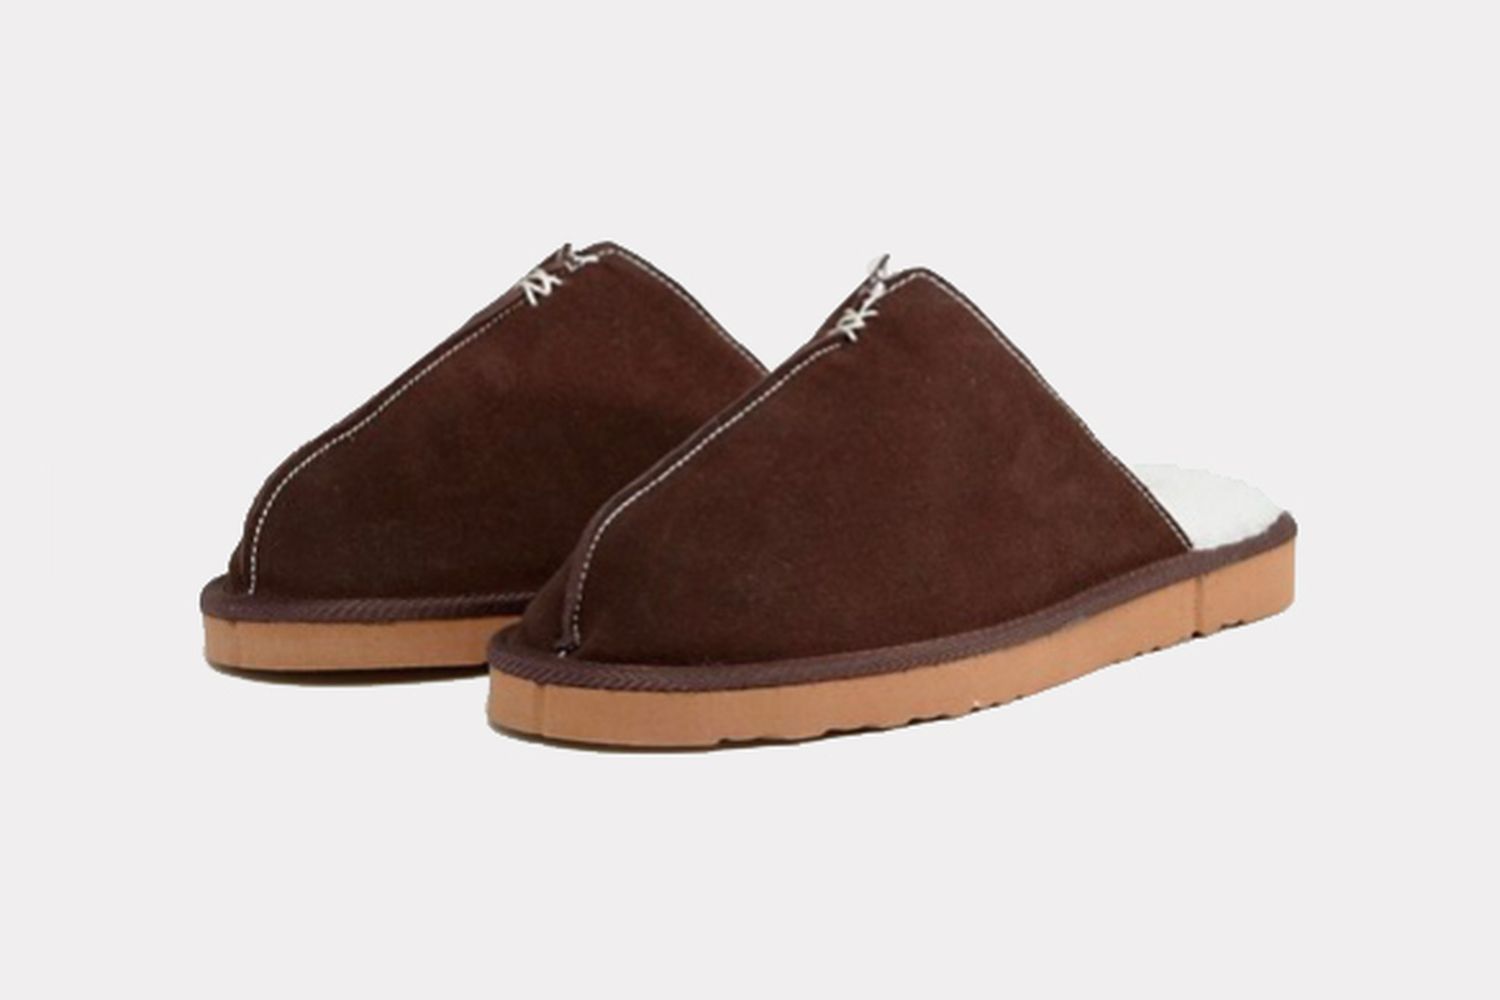 Slip on suede slippers